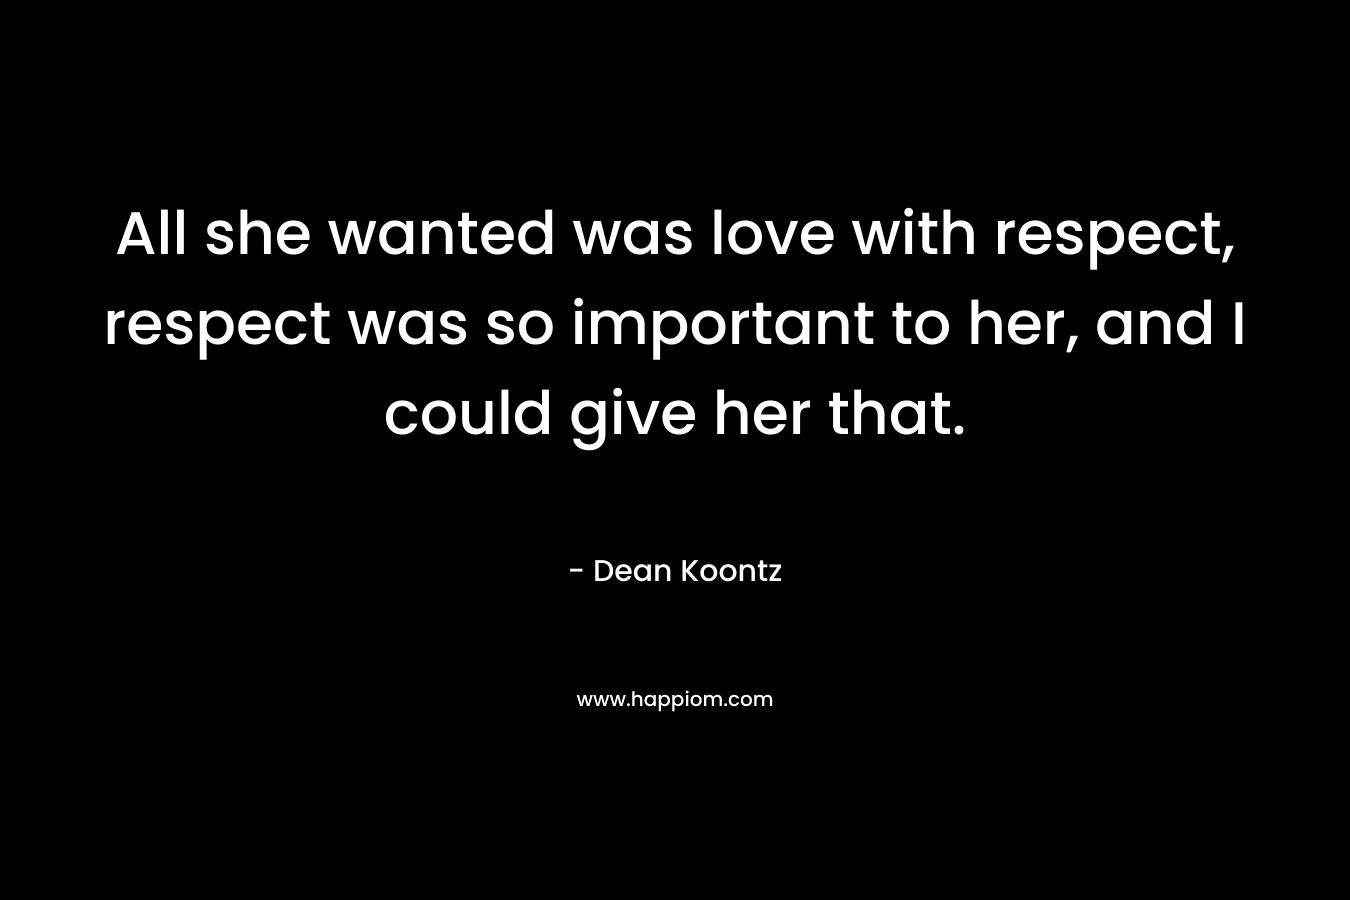 All she wanted was love with respect, respect was so important to her, and I could give her that.